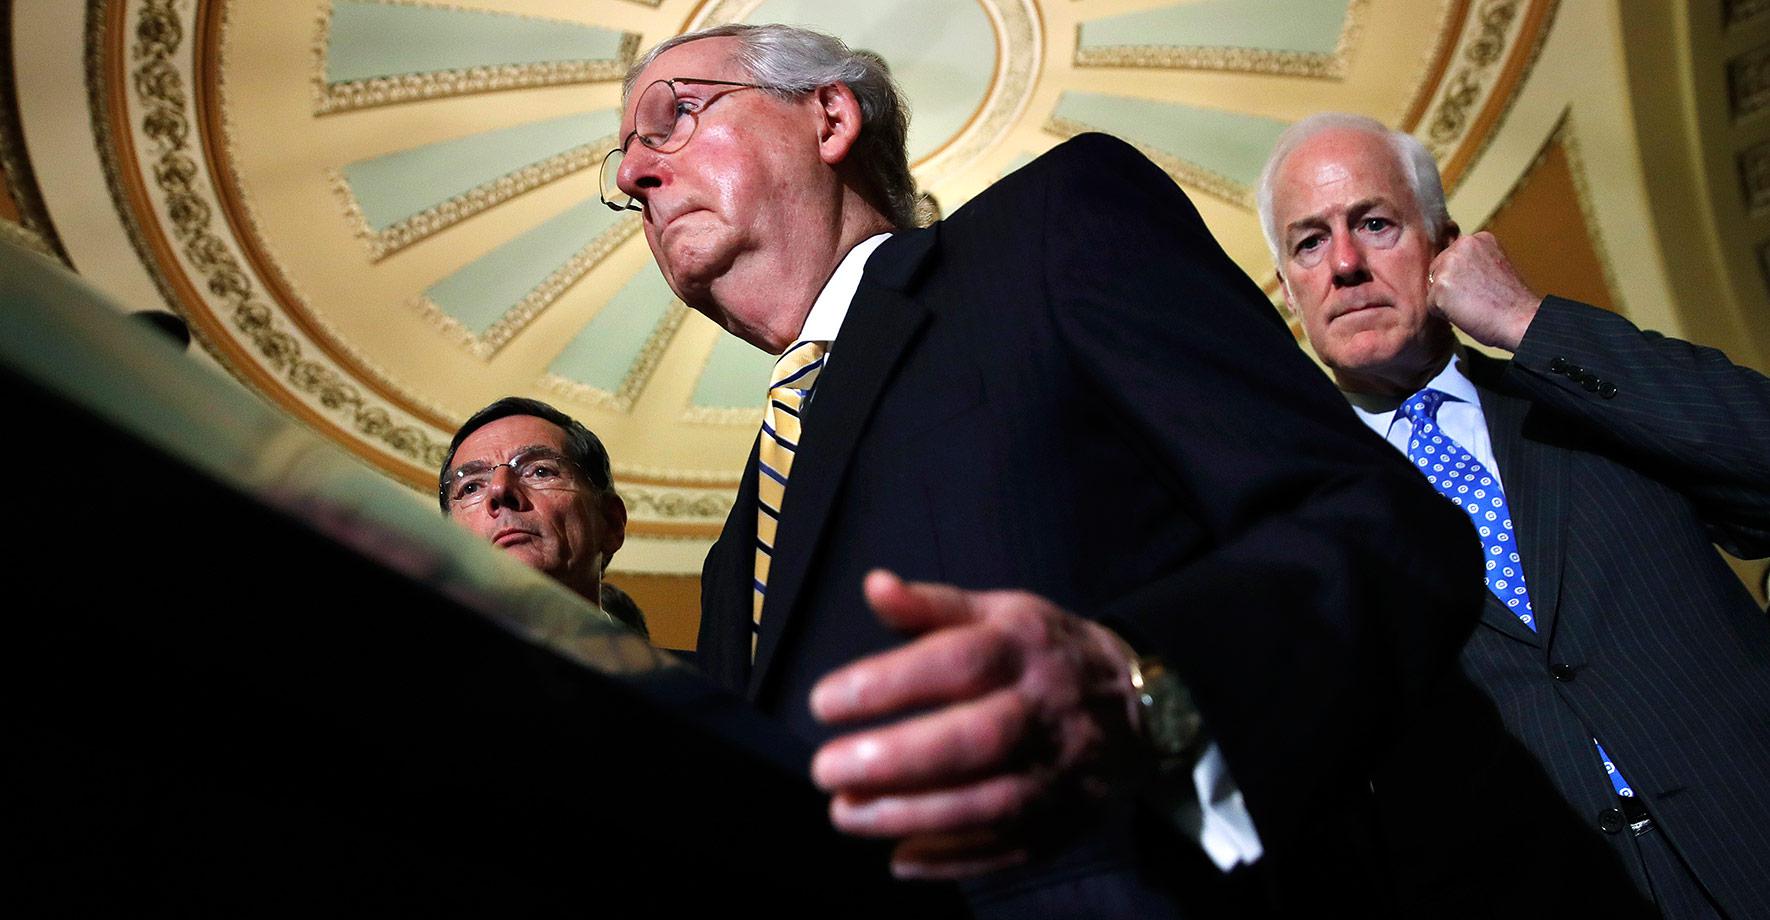 Sen. Mitch McConnell, flanked by Majority Whip Sen. John Cornyn (right) and Sen. John Barrasso, after the Tuesday vote to open debate on Obamacare repeal.